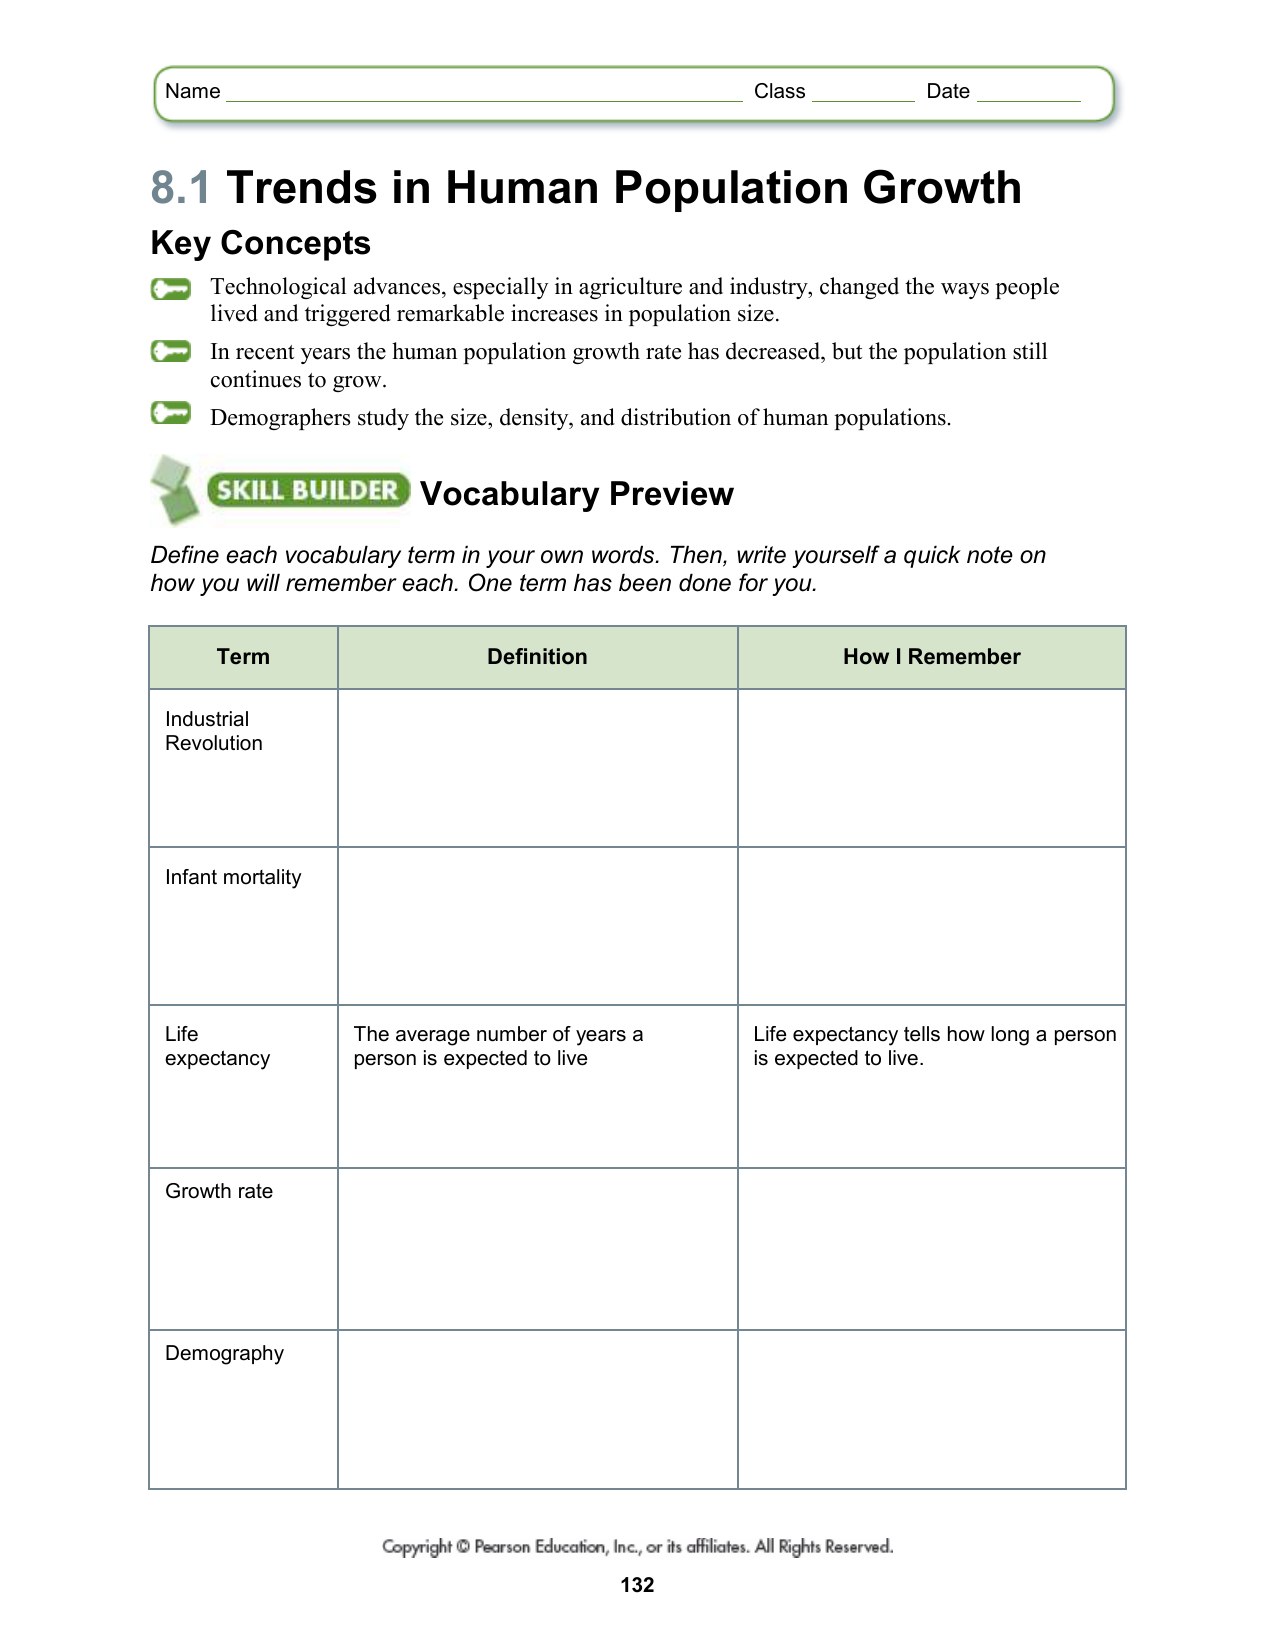 Population Growth Worksheet Answers